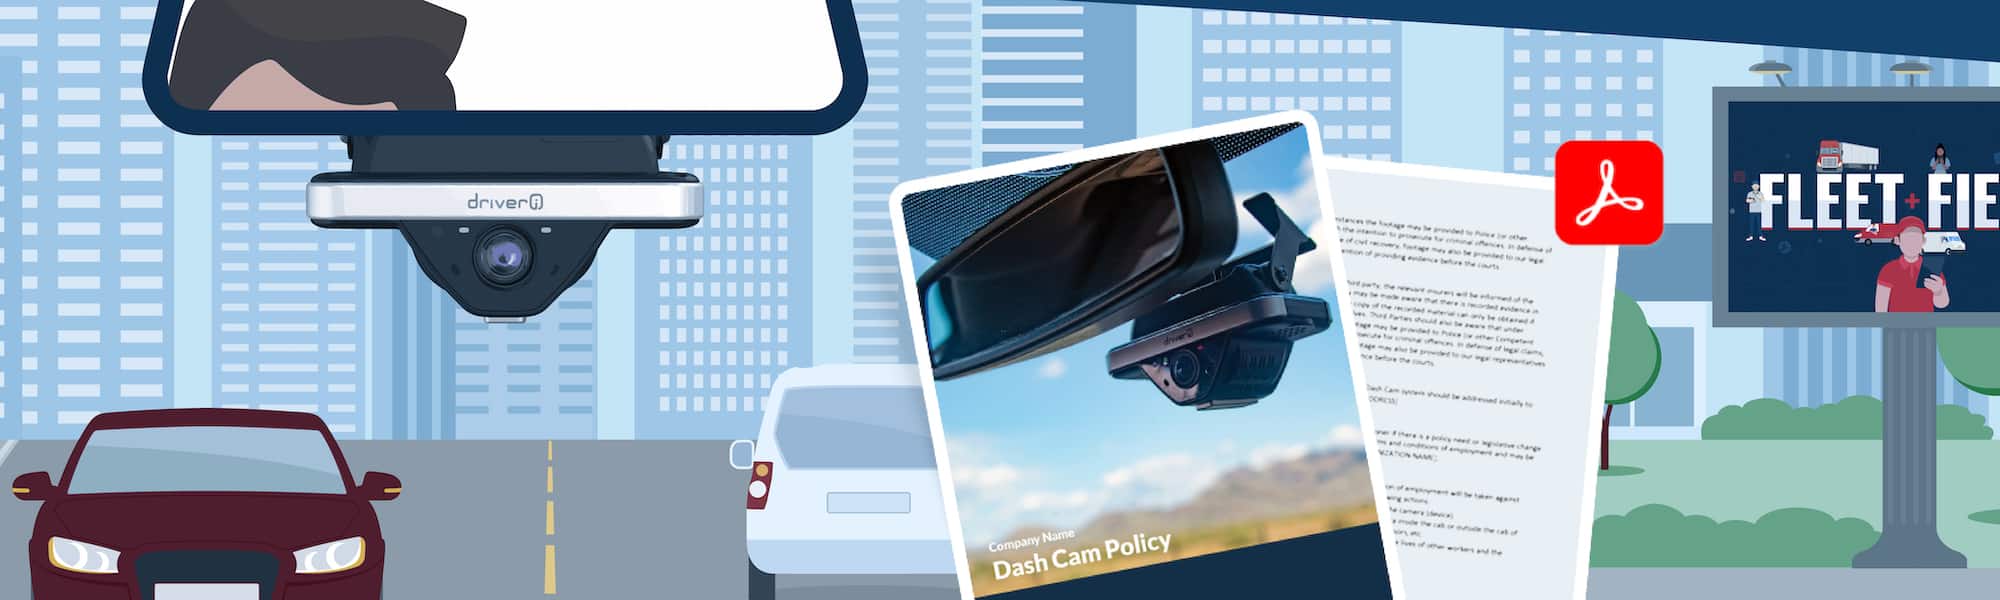 Dashcam Policy Guide